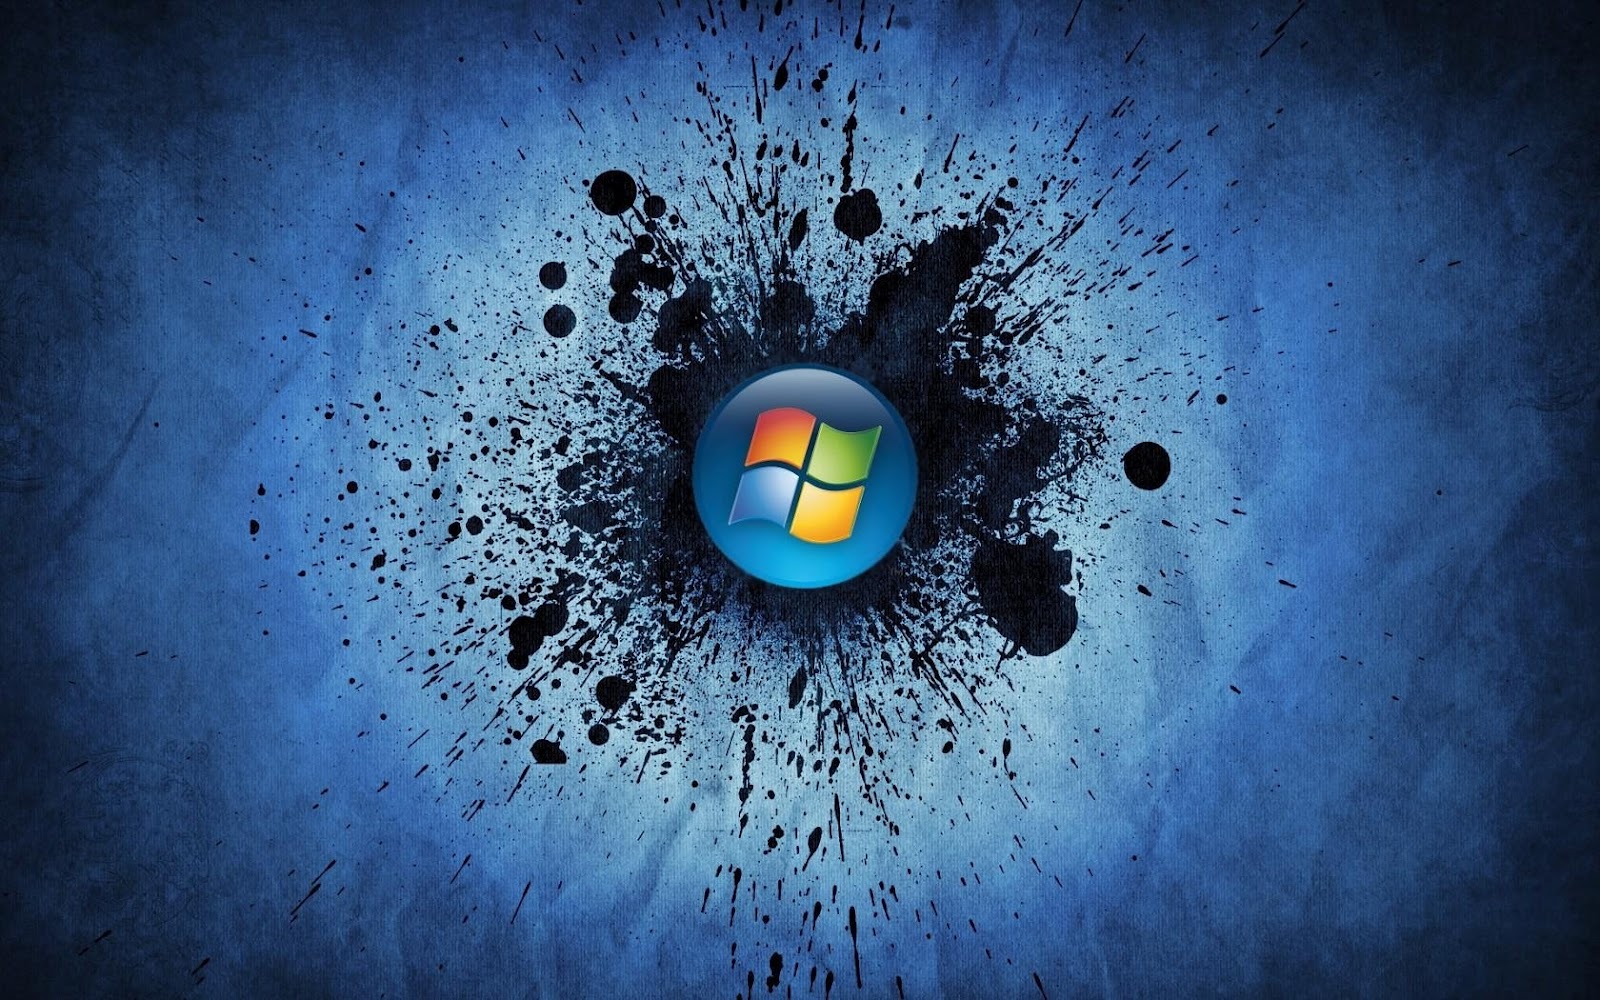 HD Wallpapers of Windows 7 | HD Wallpapers